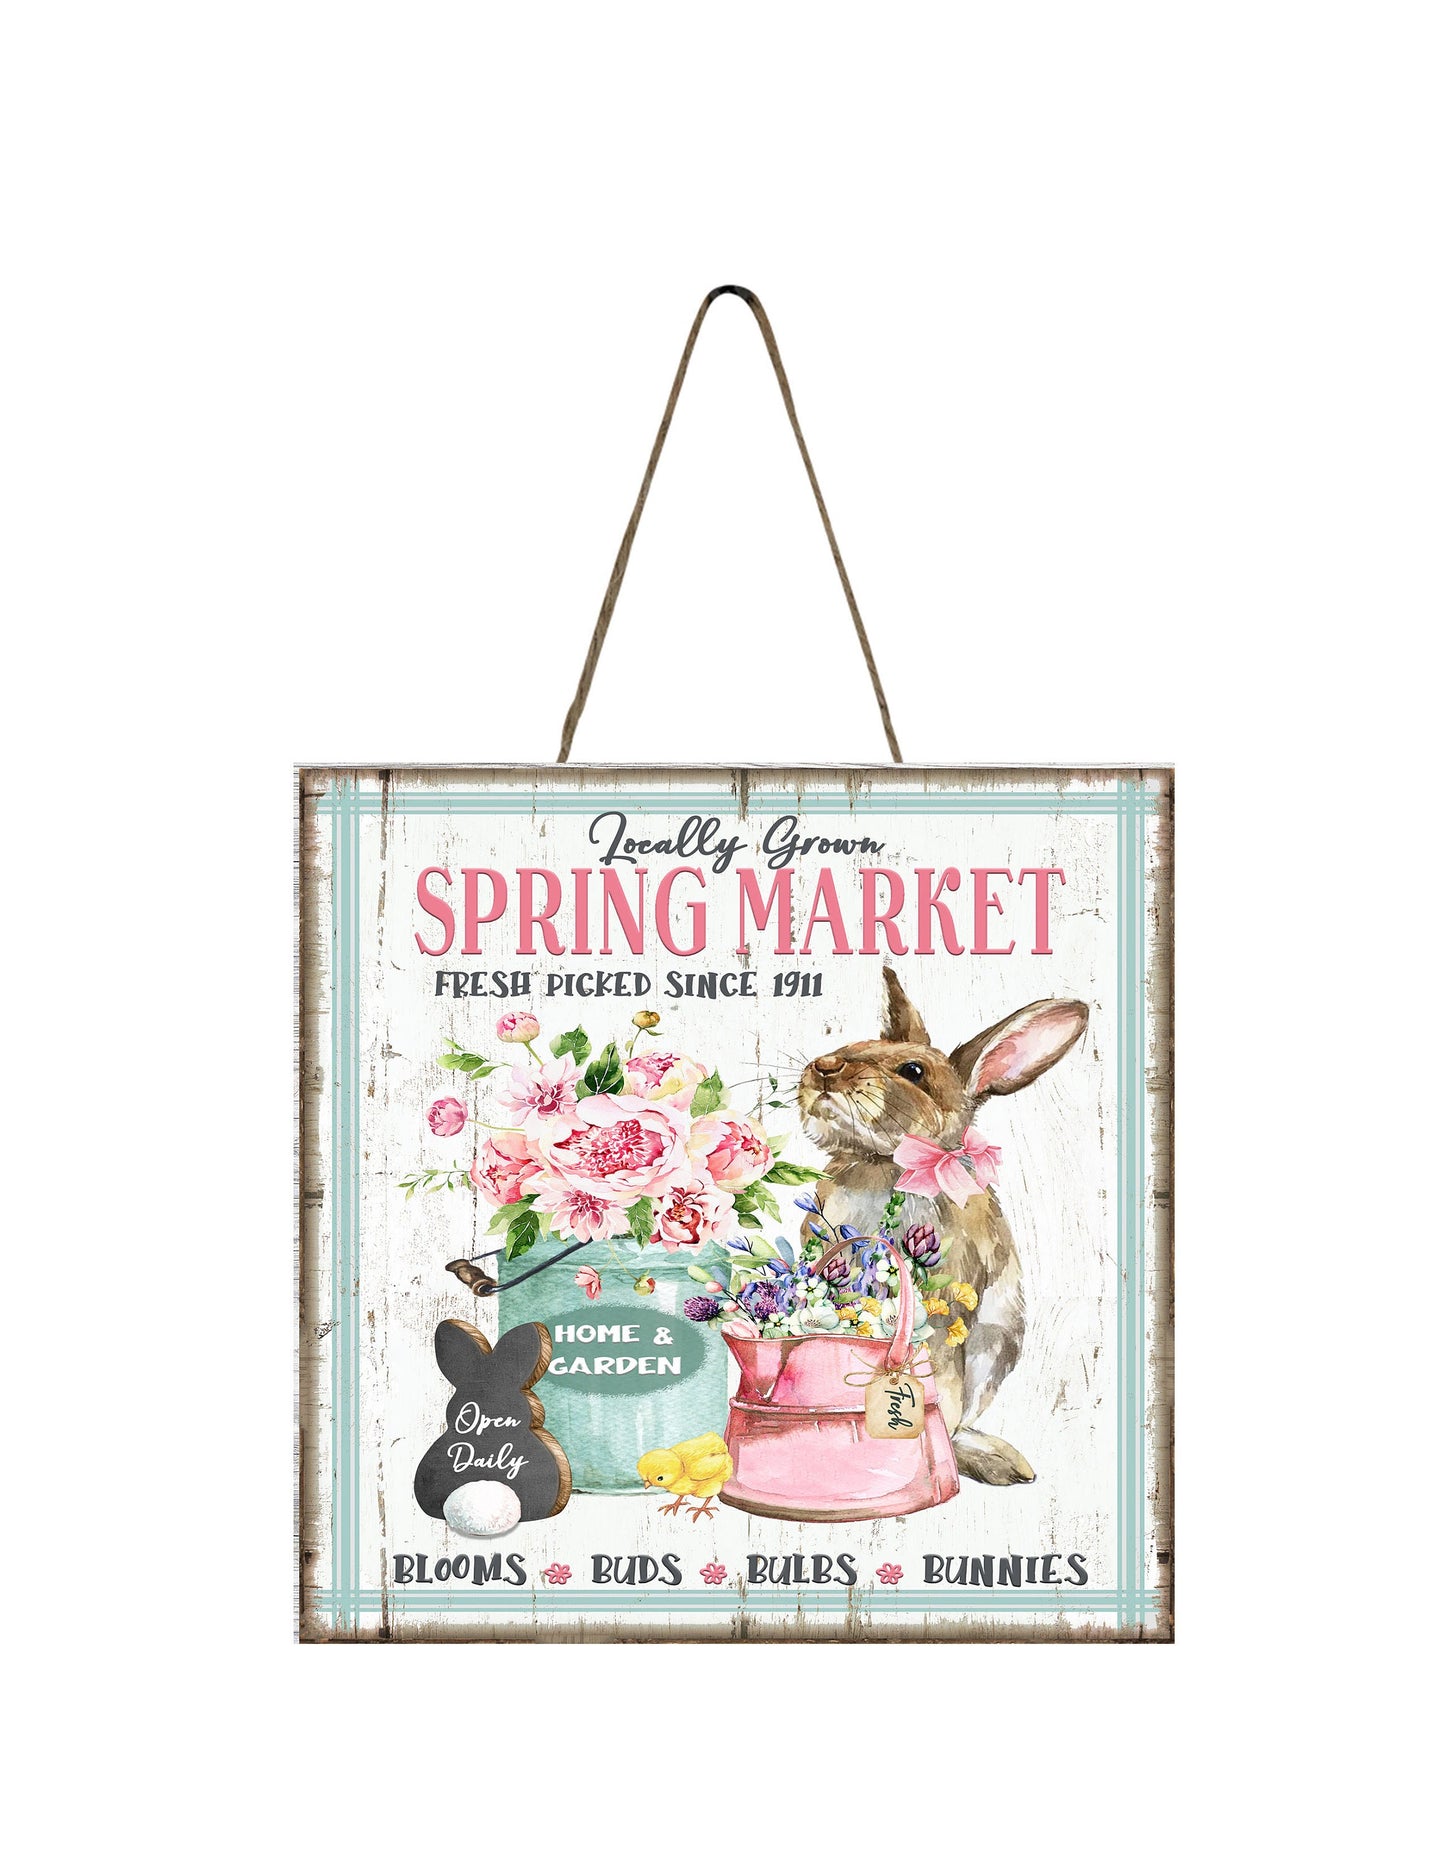 Locally Grown Spring Market Printed Handmade Wood  Mini Sign Kitchen Sign